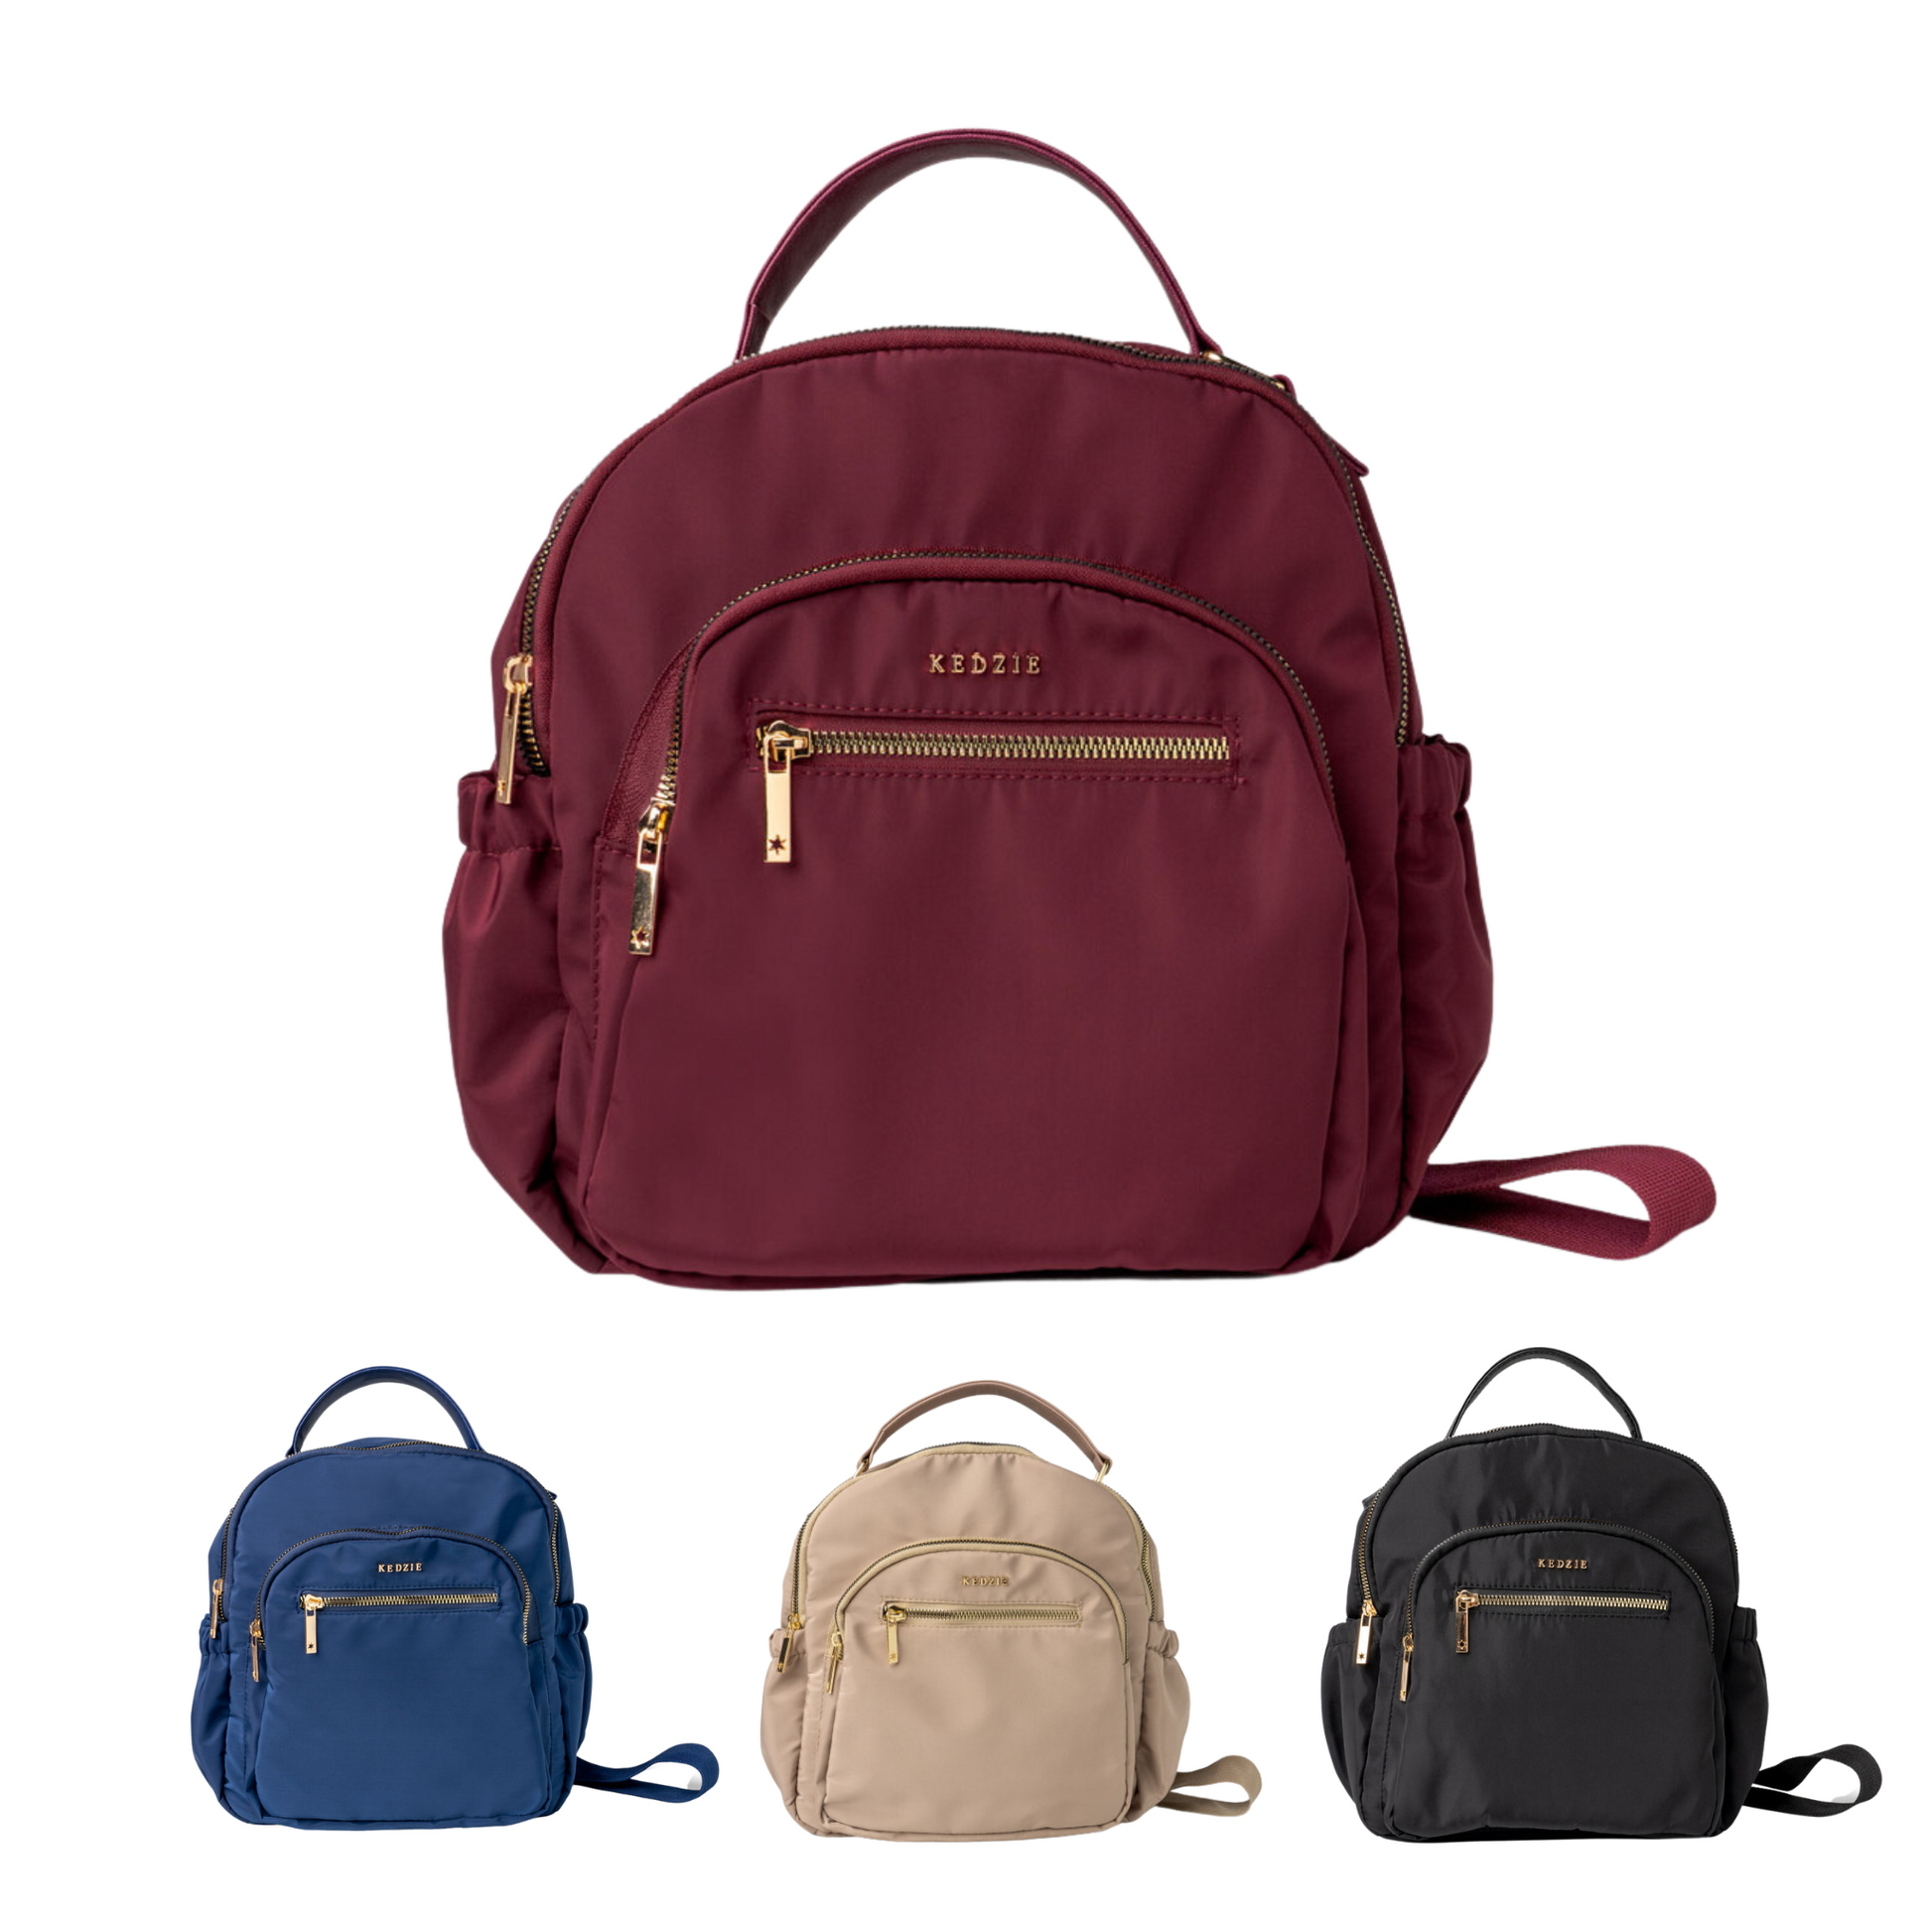 Sleek and mid-sized, this travel-friendly backpack can be worn as a classic crossbody or slipped onto your luggage with a built-in trolley strap. Available in Burgundy, Navy, Taupe, and Black